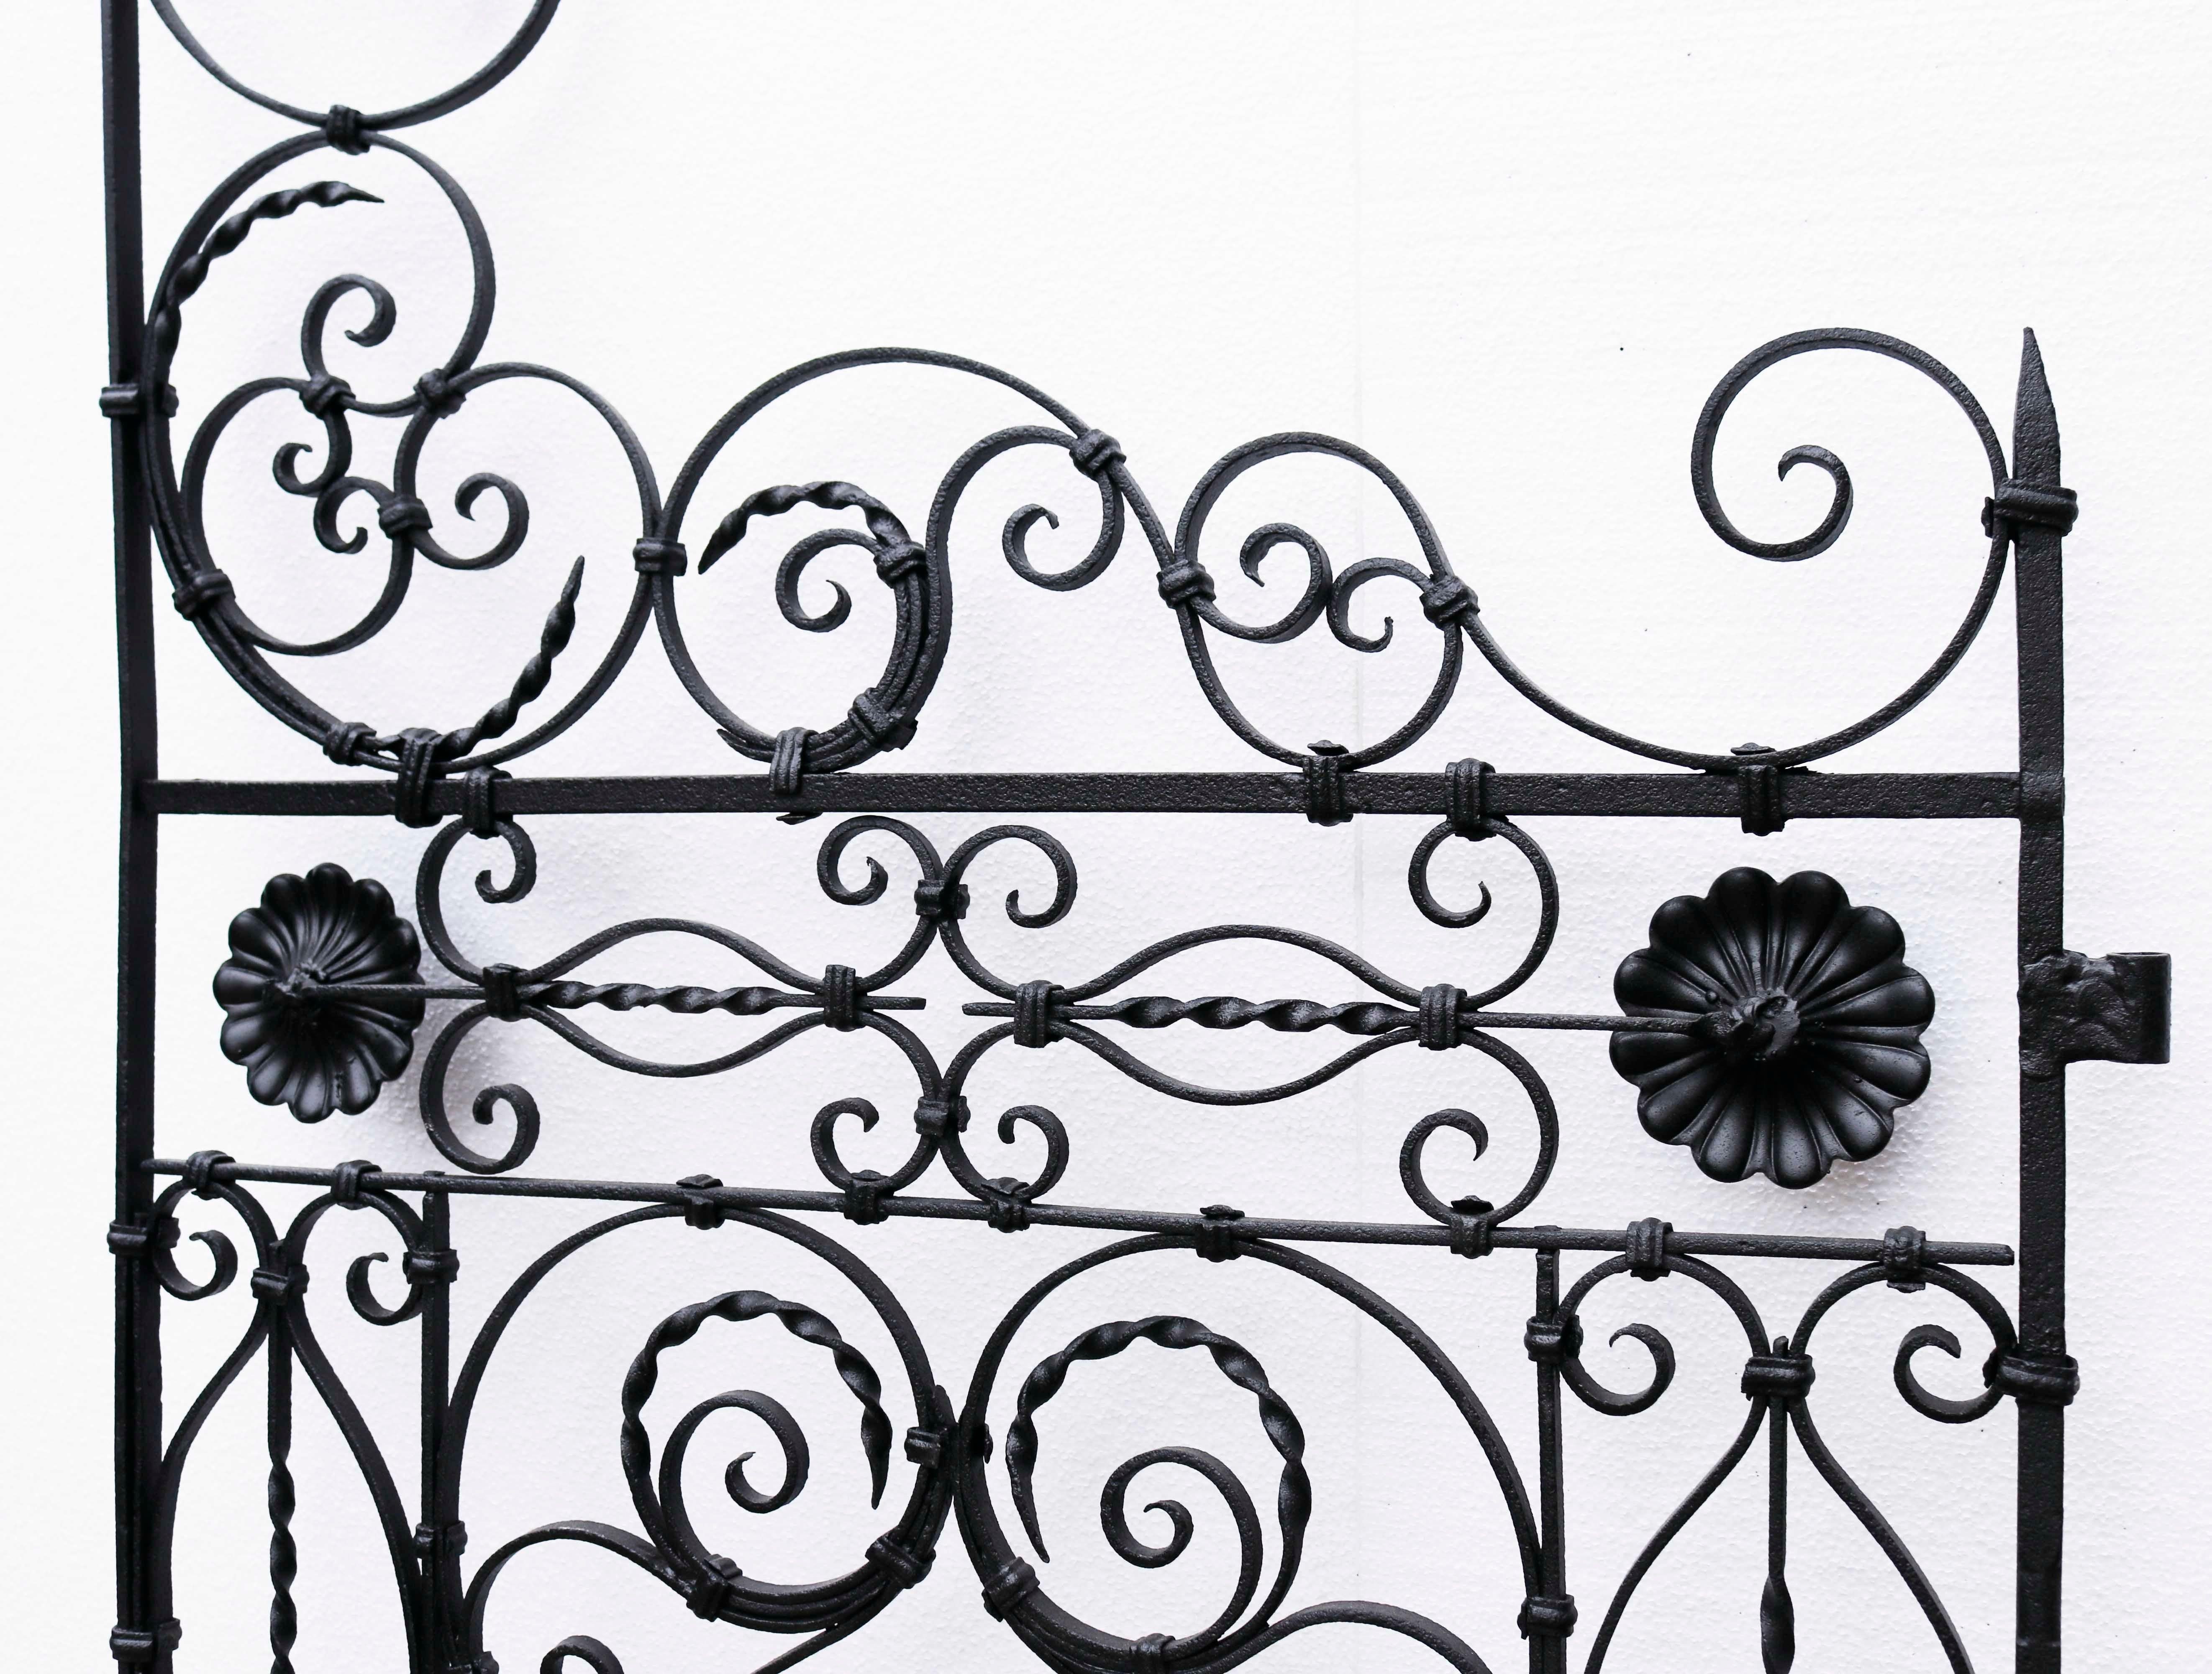 Set of Ornate antique wrought iron gates. A set of tall iron gates with an intricate scrolling pattern. These gates have been fully restored.